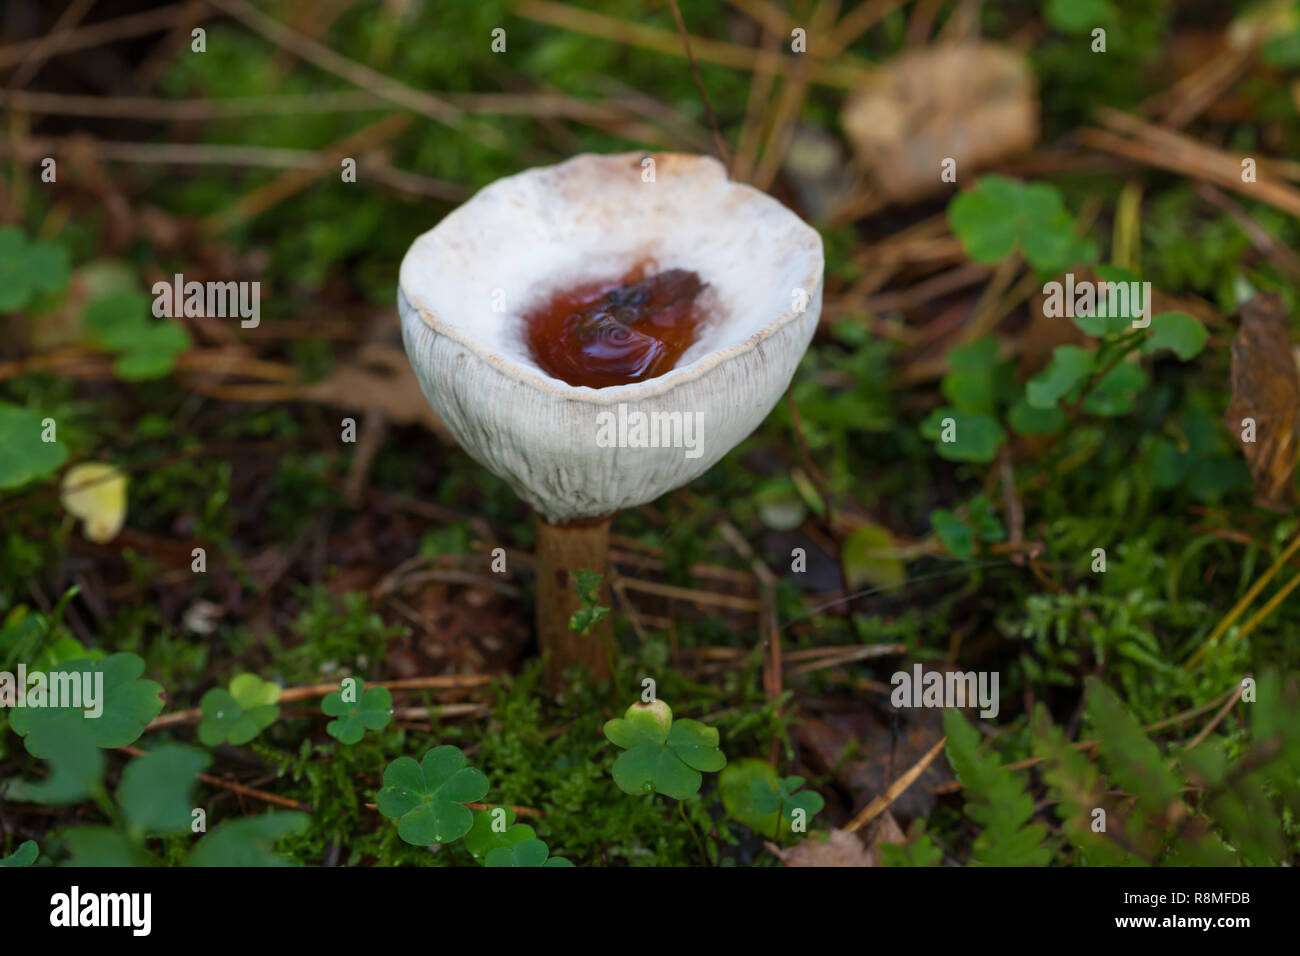 Old white mushroom turned out in the form of a wine glass Stock Photo